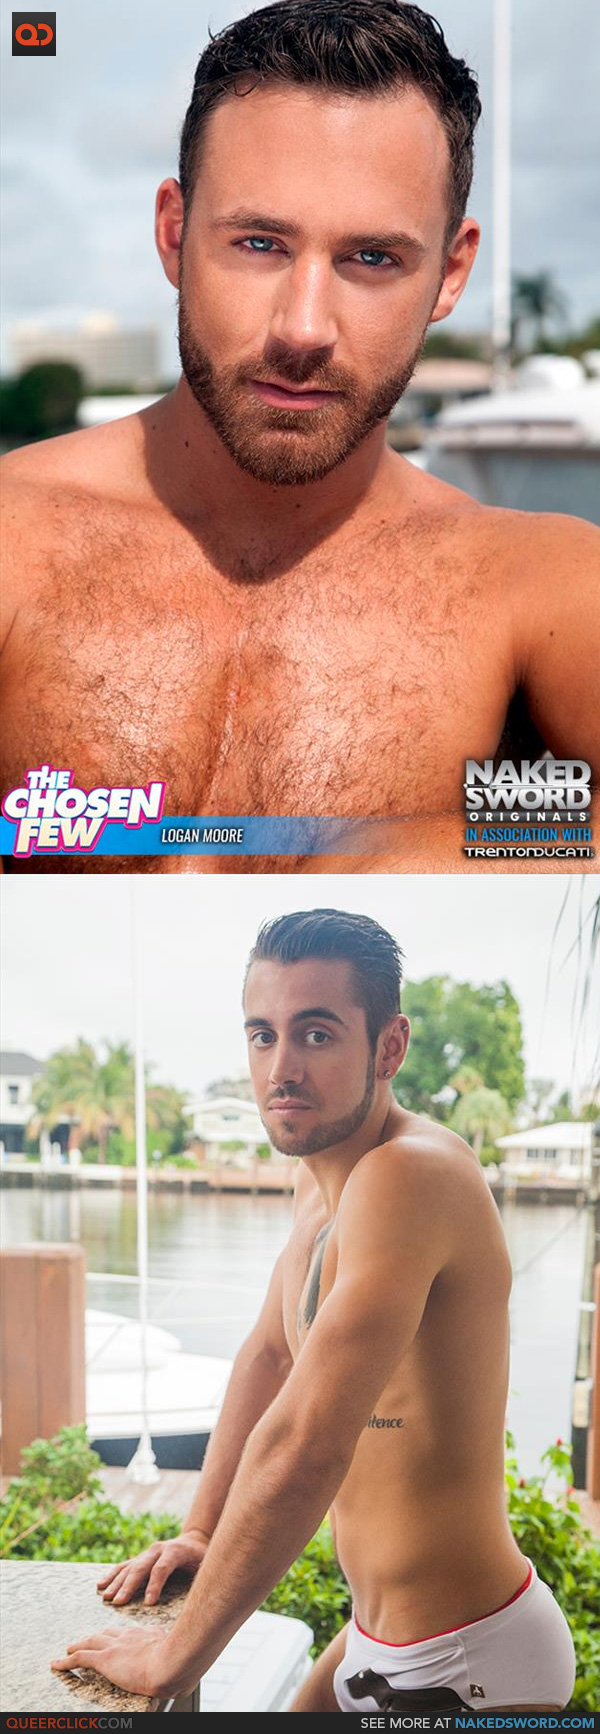 Naked Sword: Logan Moore and Dante Colle